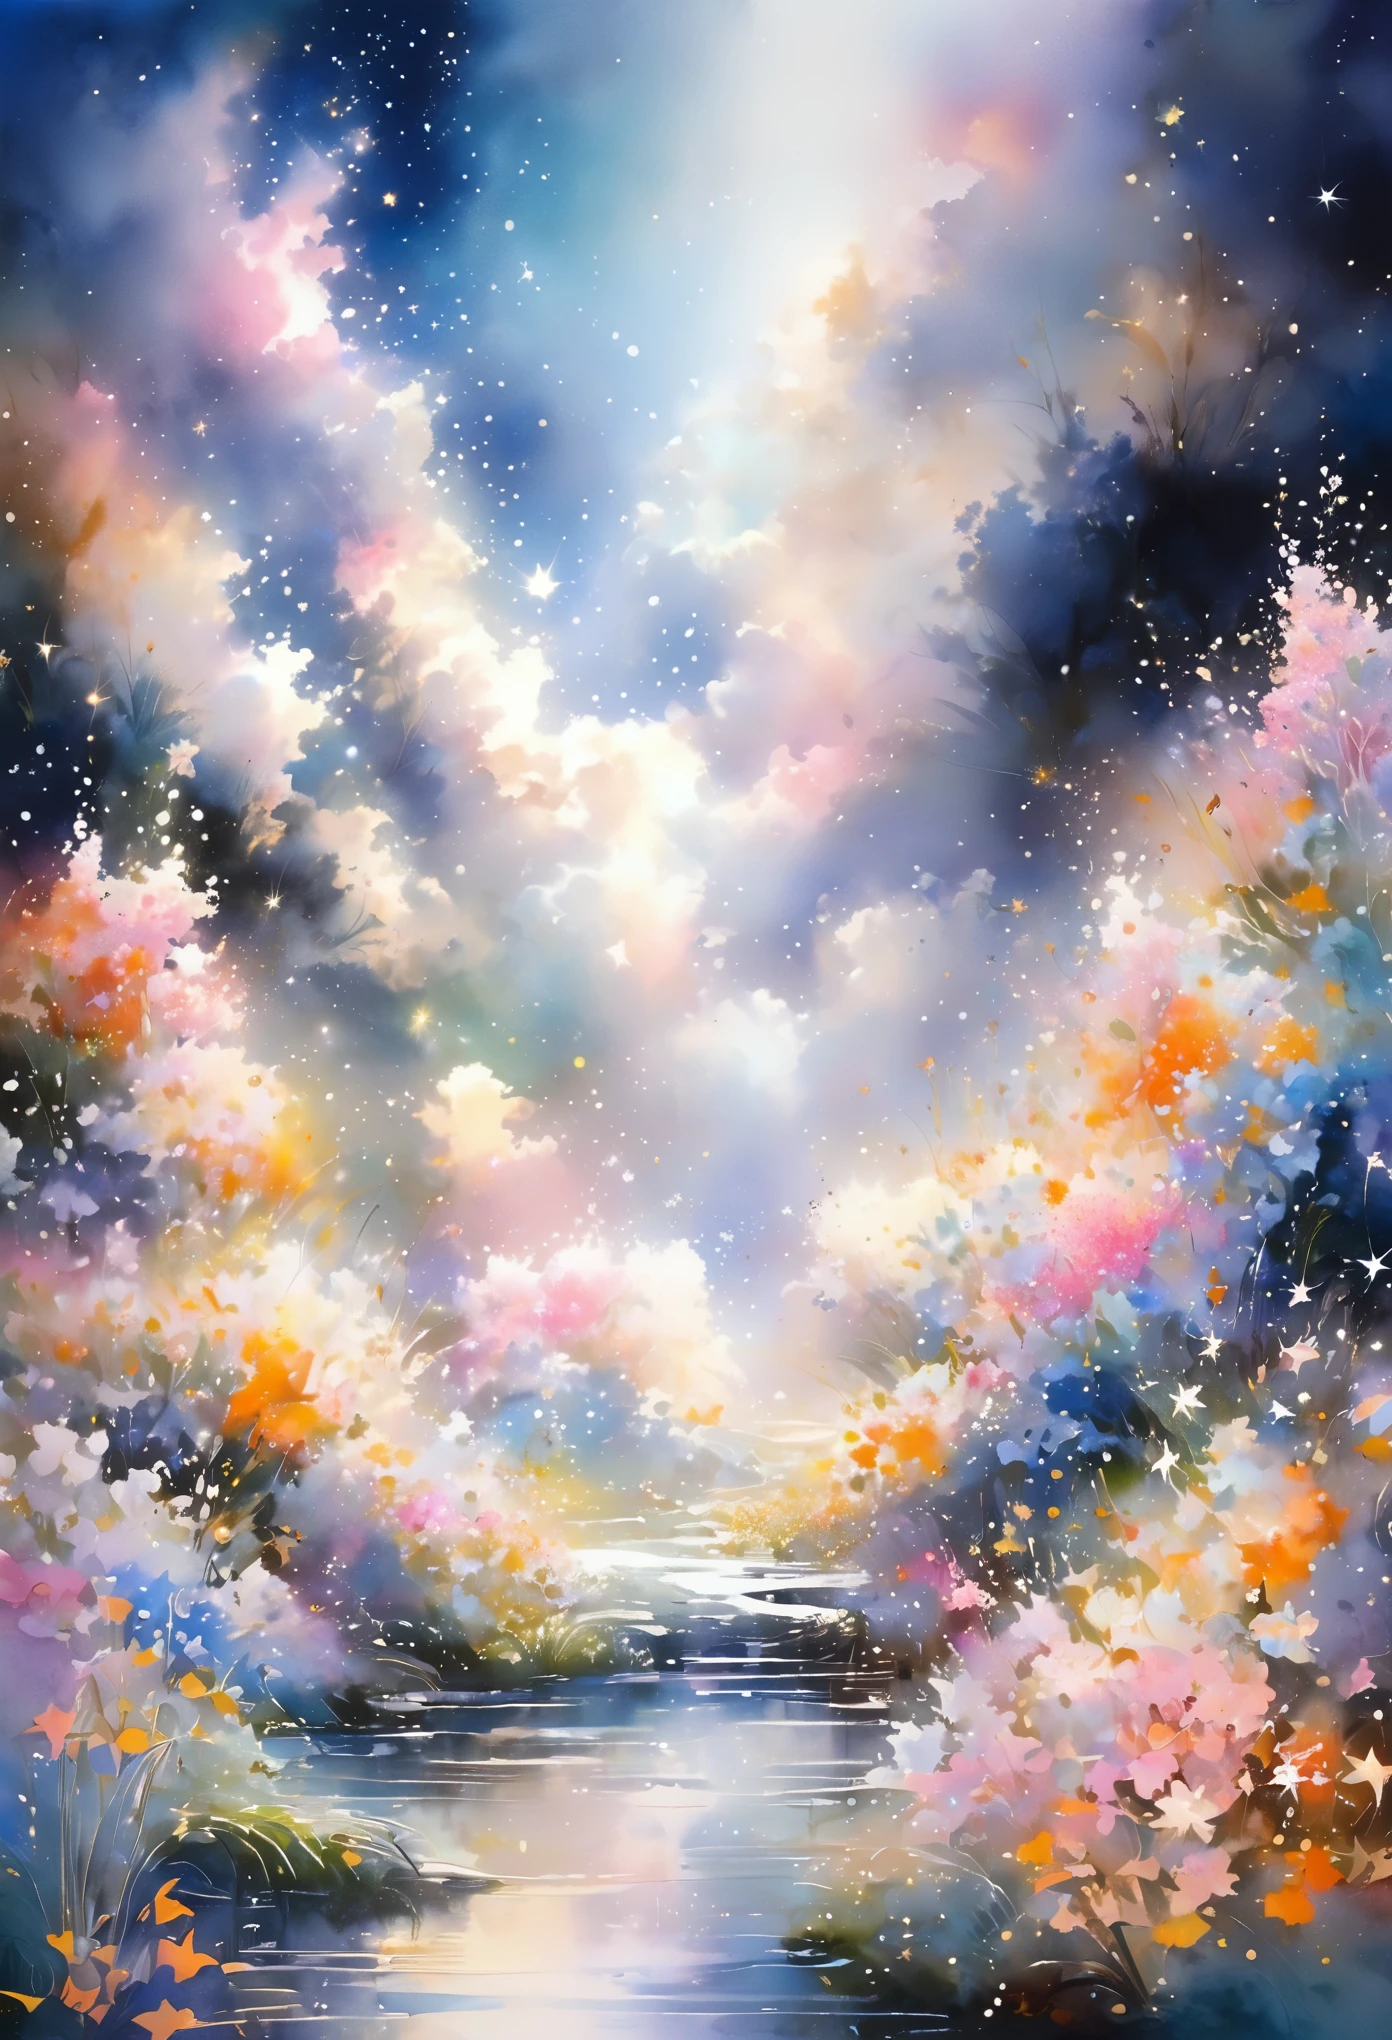 up-and-coming works of art, fusion of watercolor and oil painting, best quality, super fine, 16k, delicate and dynamic beautiful depiction, flower garden blooming in outer space, white, pink, orange, river of small stars, river of small stars flowing, mysterious and developing, space fantasy, curtain of light, Christian Lassen style